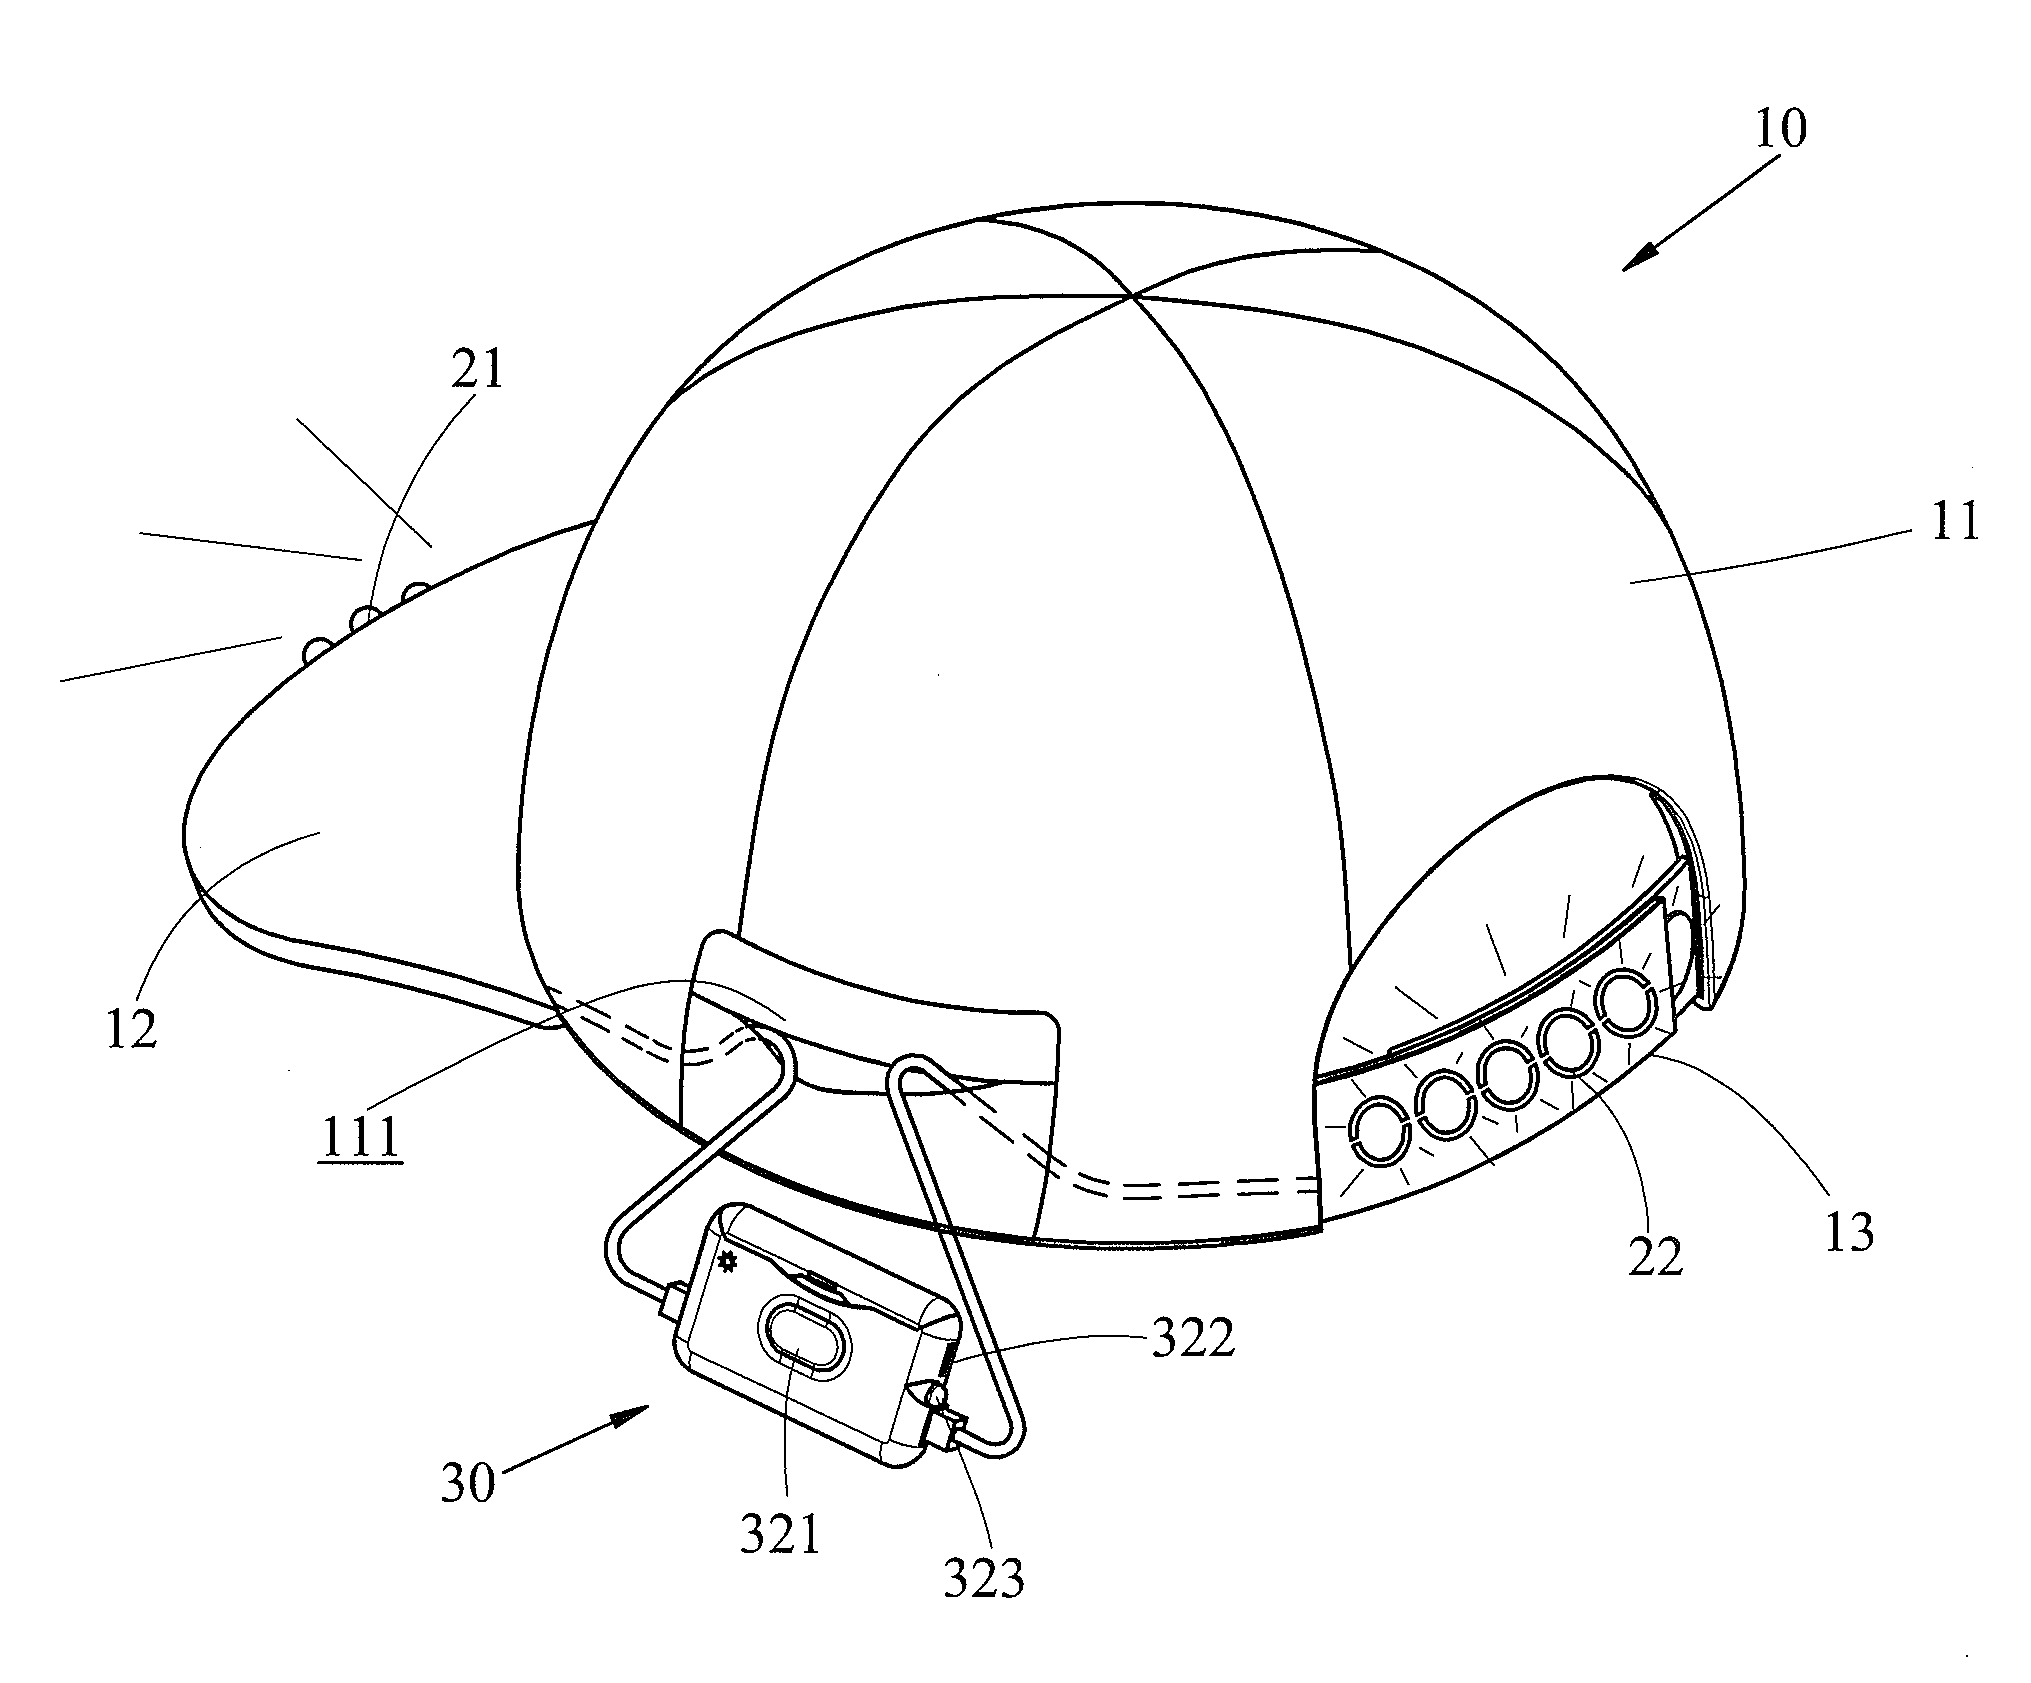 Lighted hat with a power supply device as flashlight